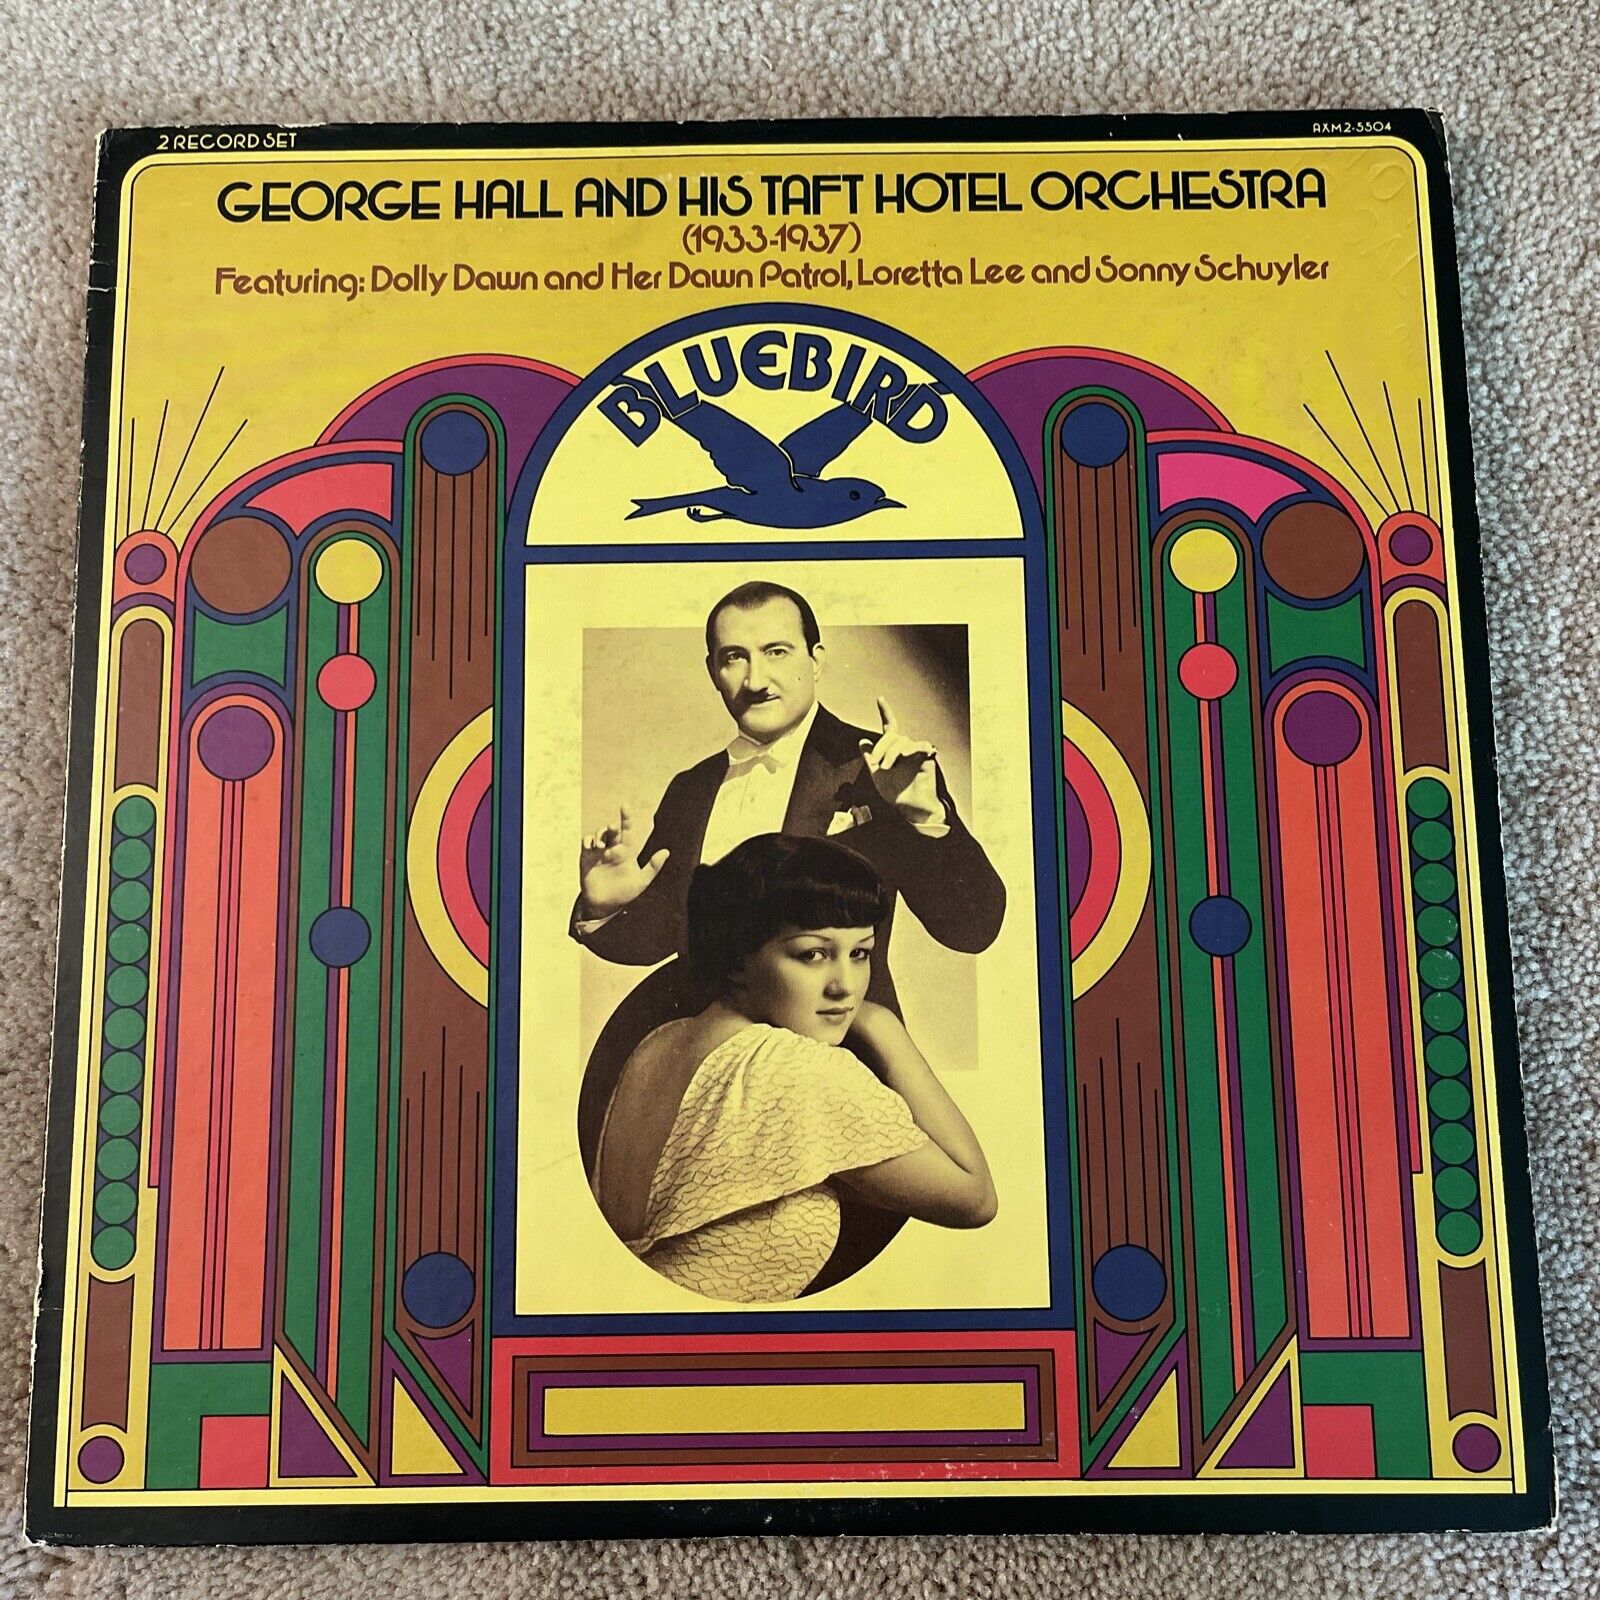 George Hall And His Taft Hotel Orchestra 1933-1937 Vinyl 2 record set